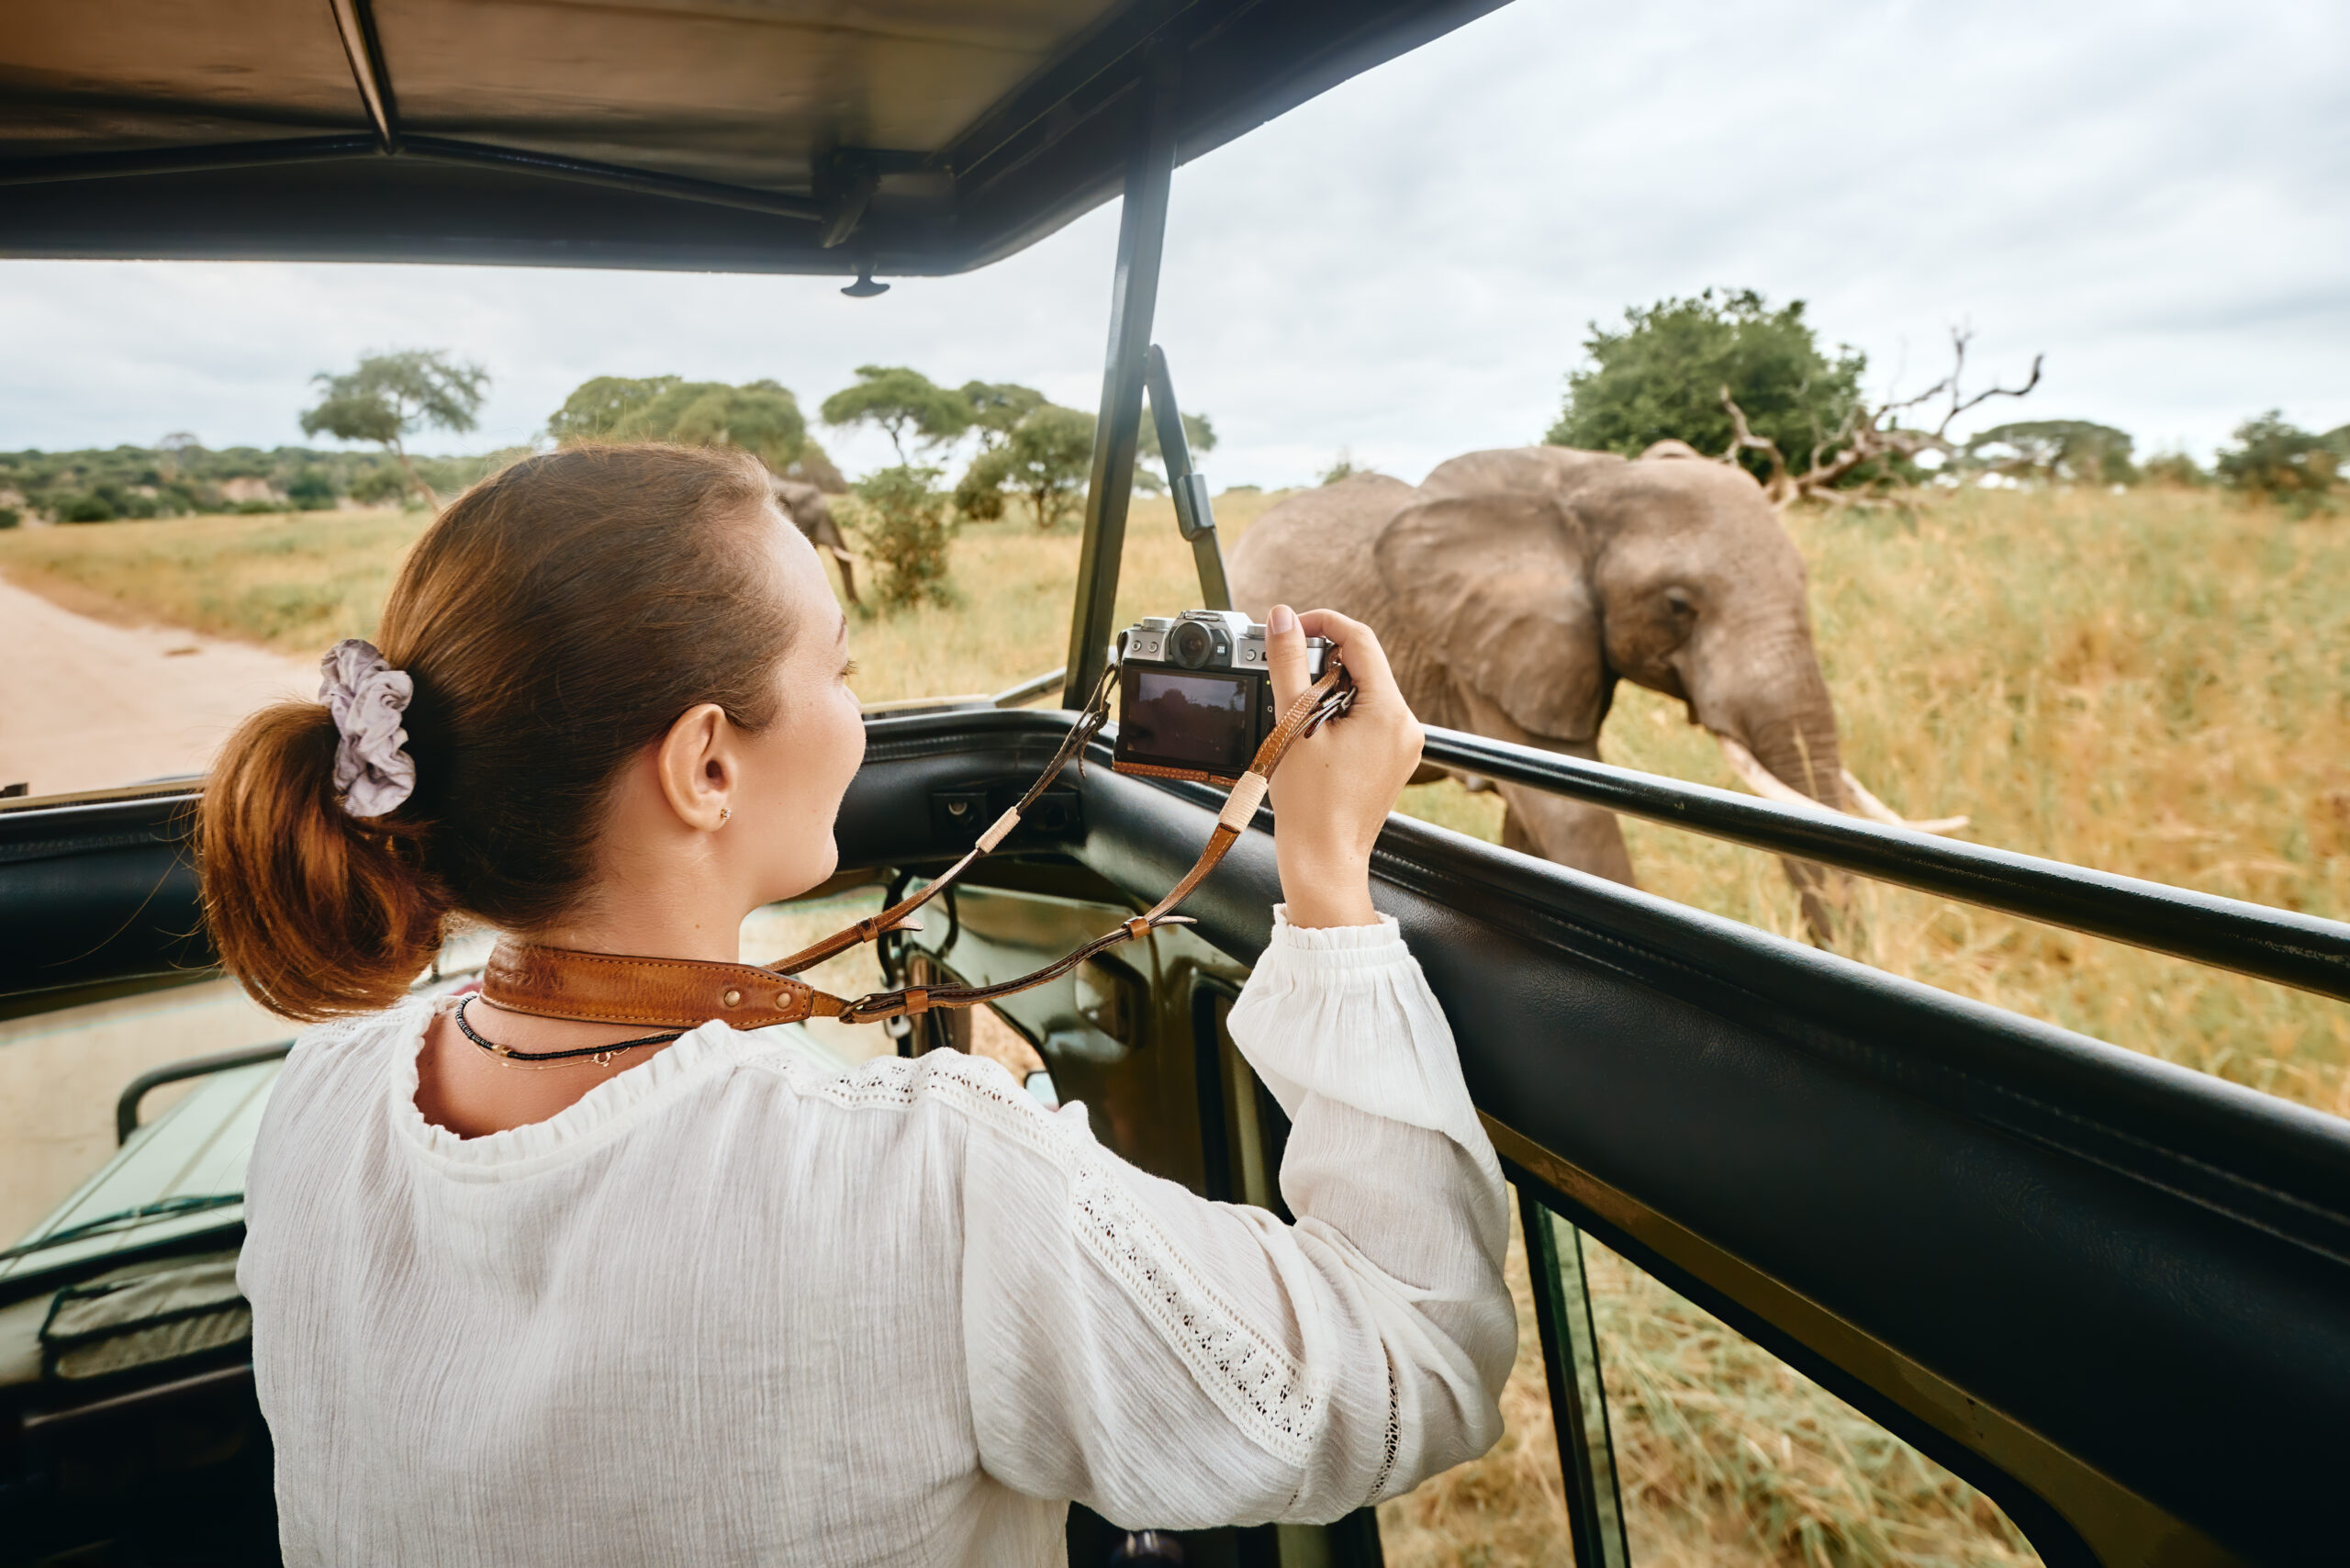 Woman,Tourist,On,Safari,In,Africa,,Traveling,By,Car,With